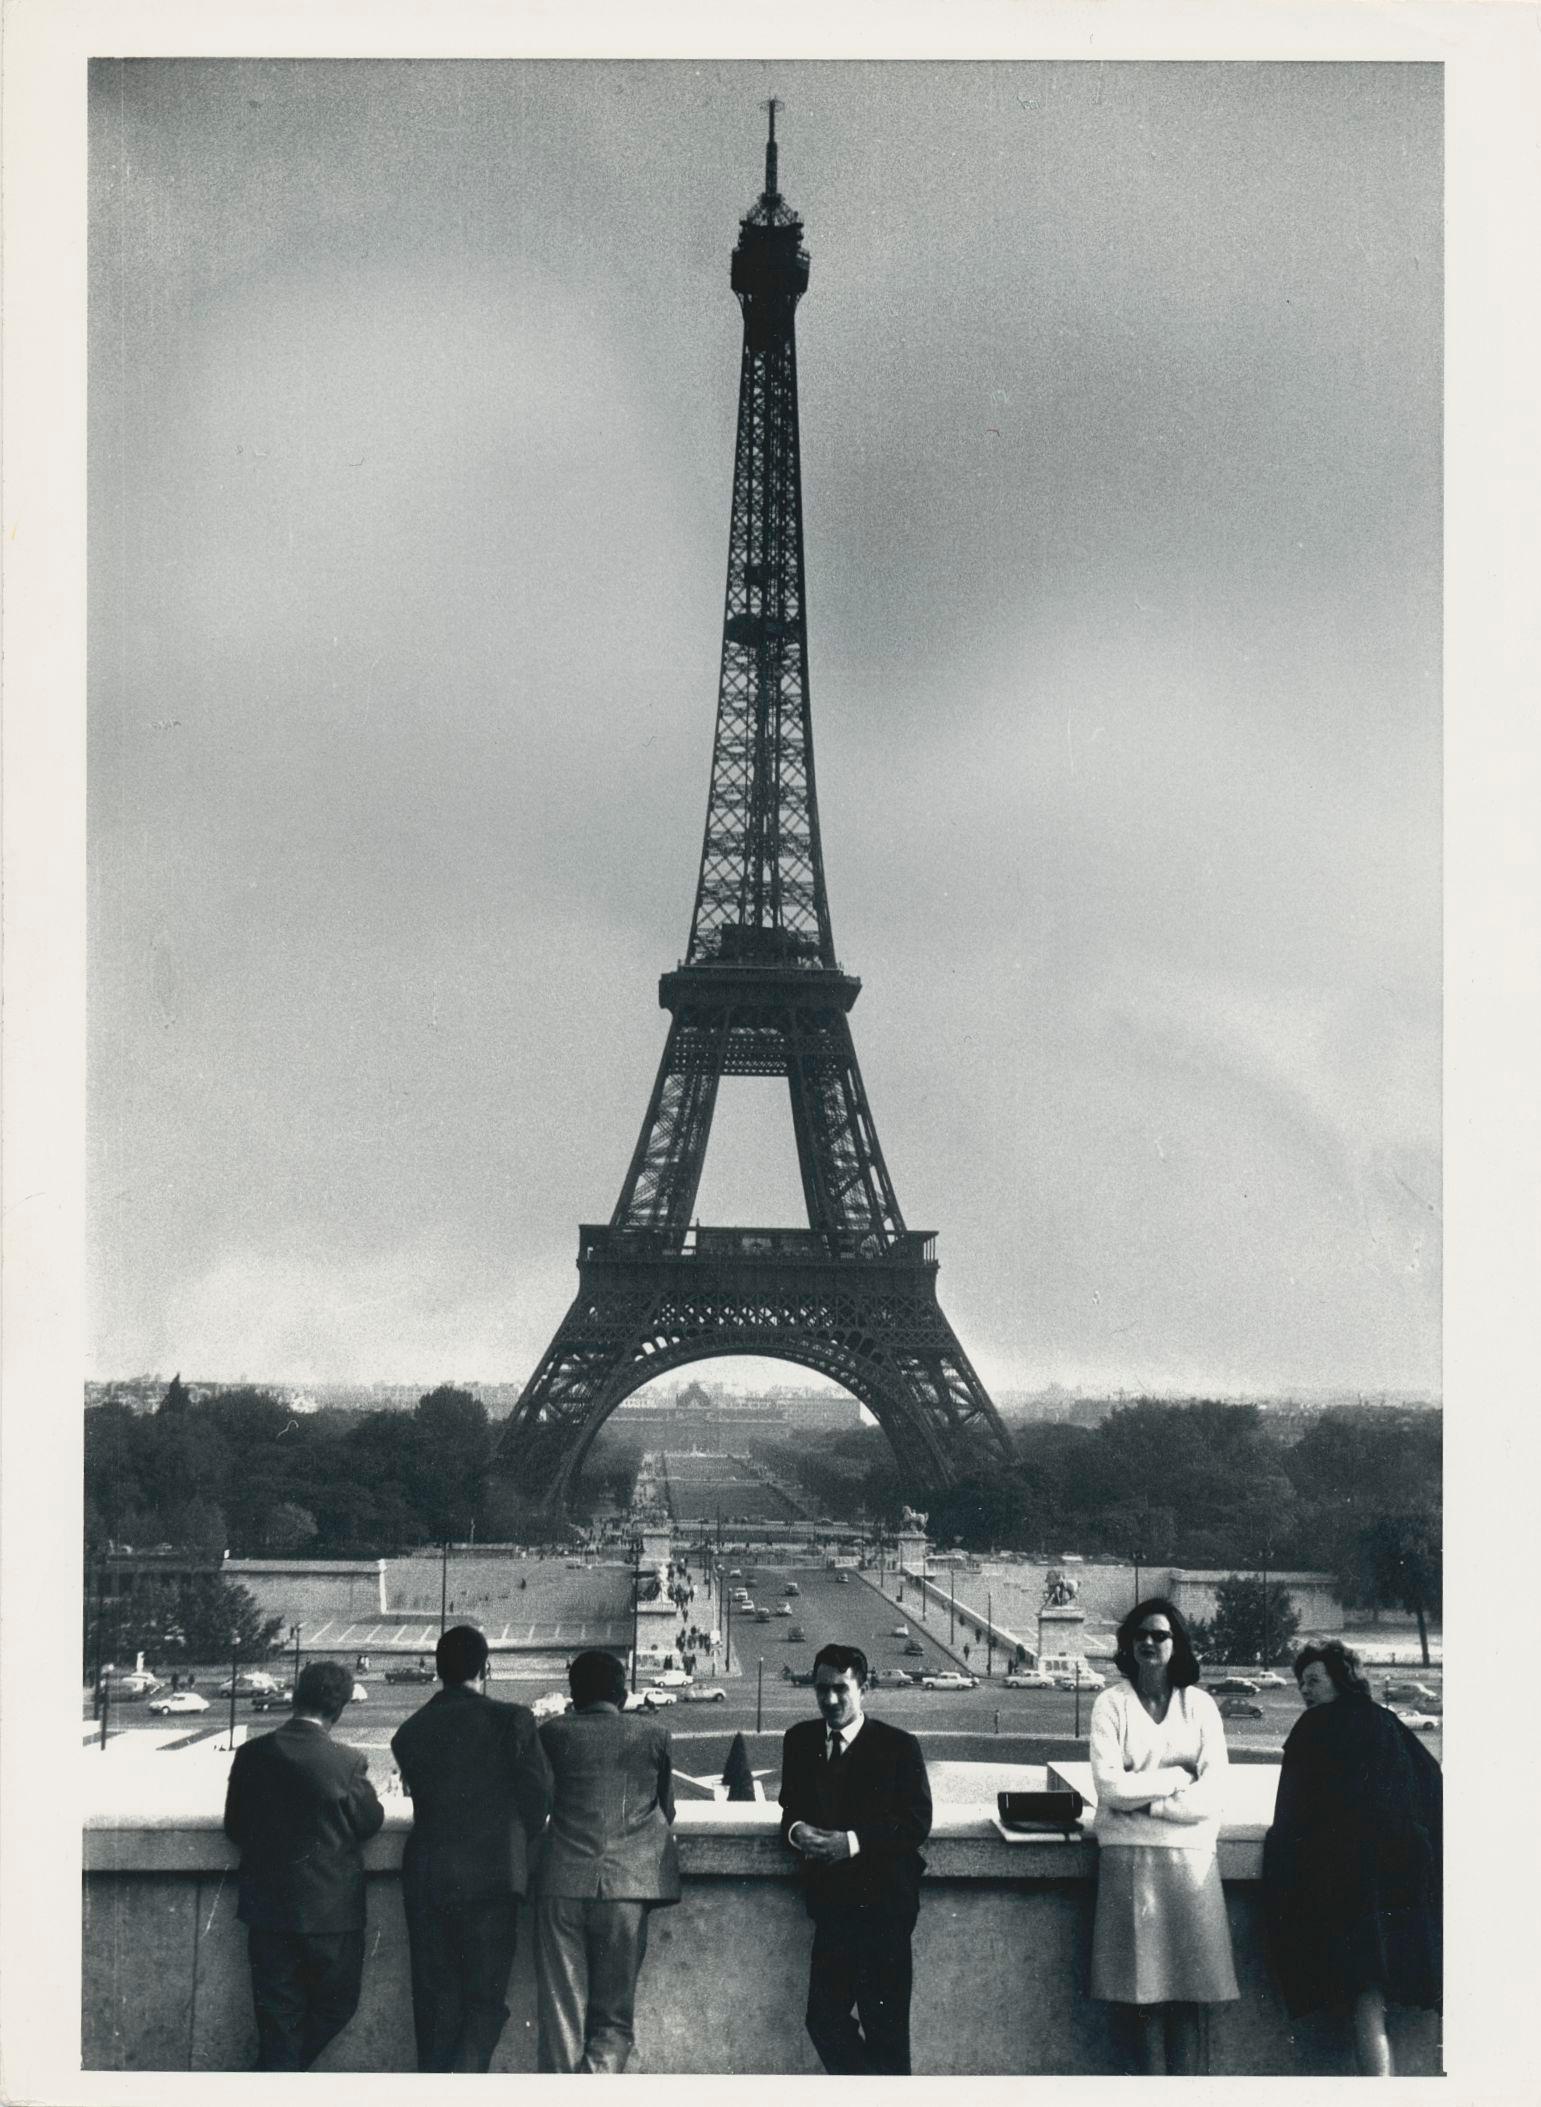 Erich Andres Black and White Photograph - Eiffel Tower, Street Photography, Black and White, France 1950s, 17, 8 x 13, 1 cm